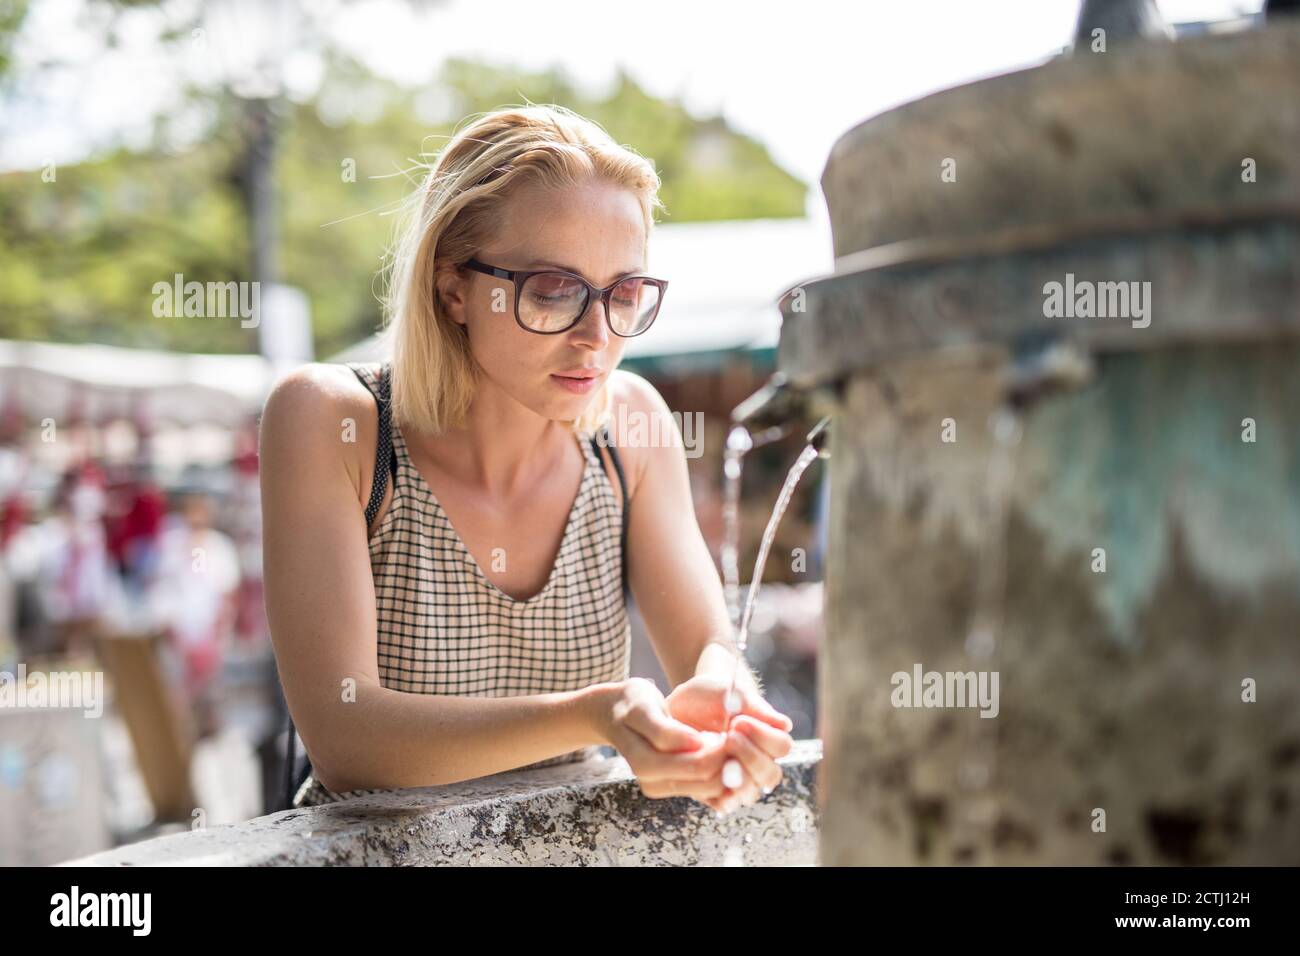 Thirsty young casual cucasian woman drinking water from public city fountain on a hot summer day Stock Photo